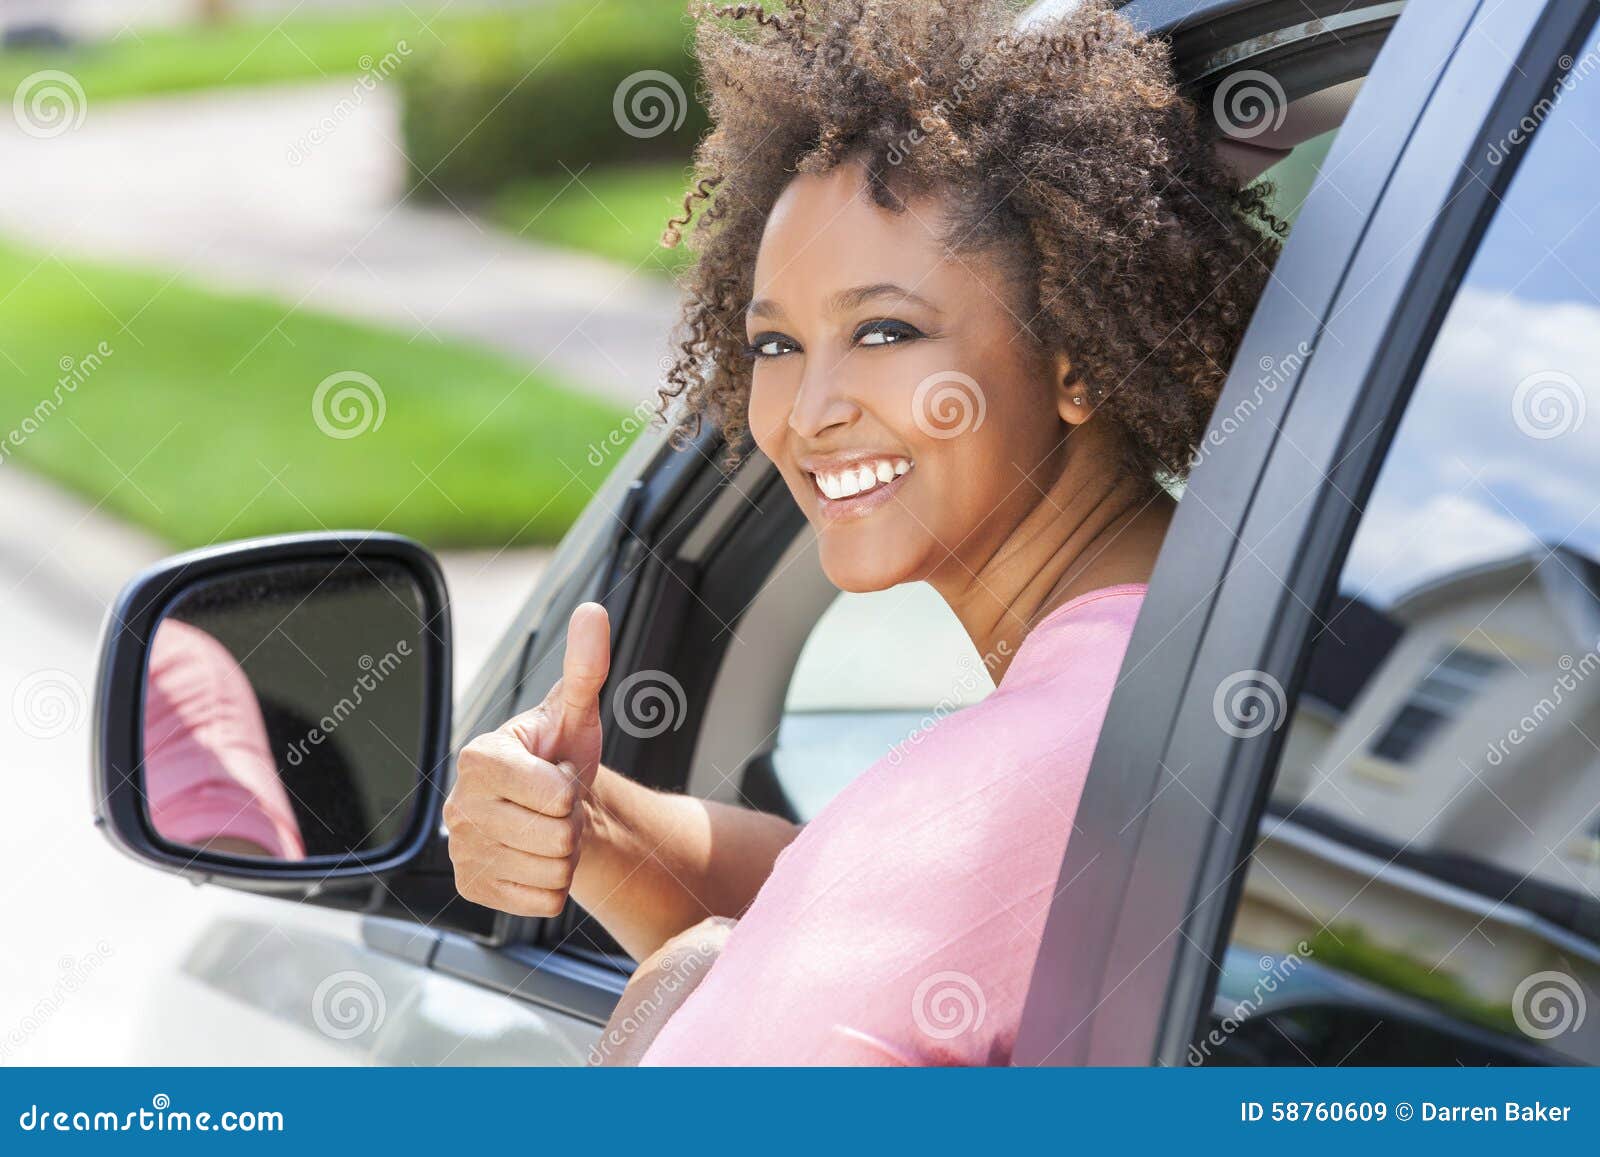 african american girl woman thumbs up driving car